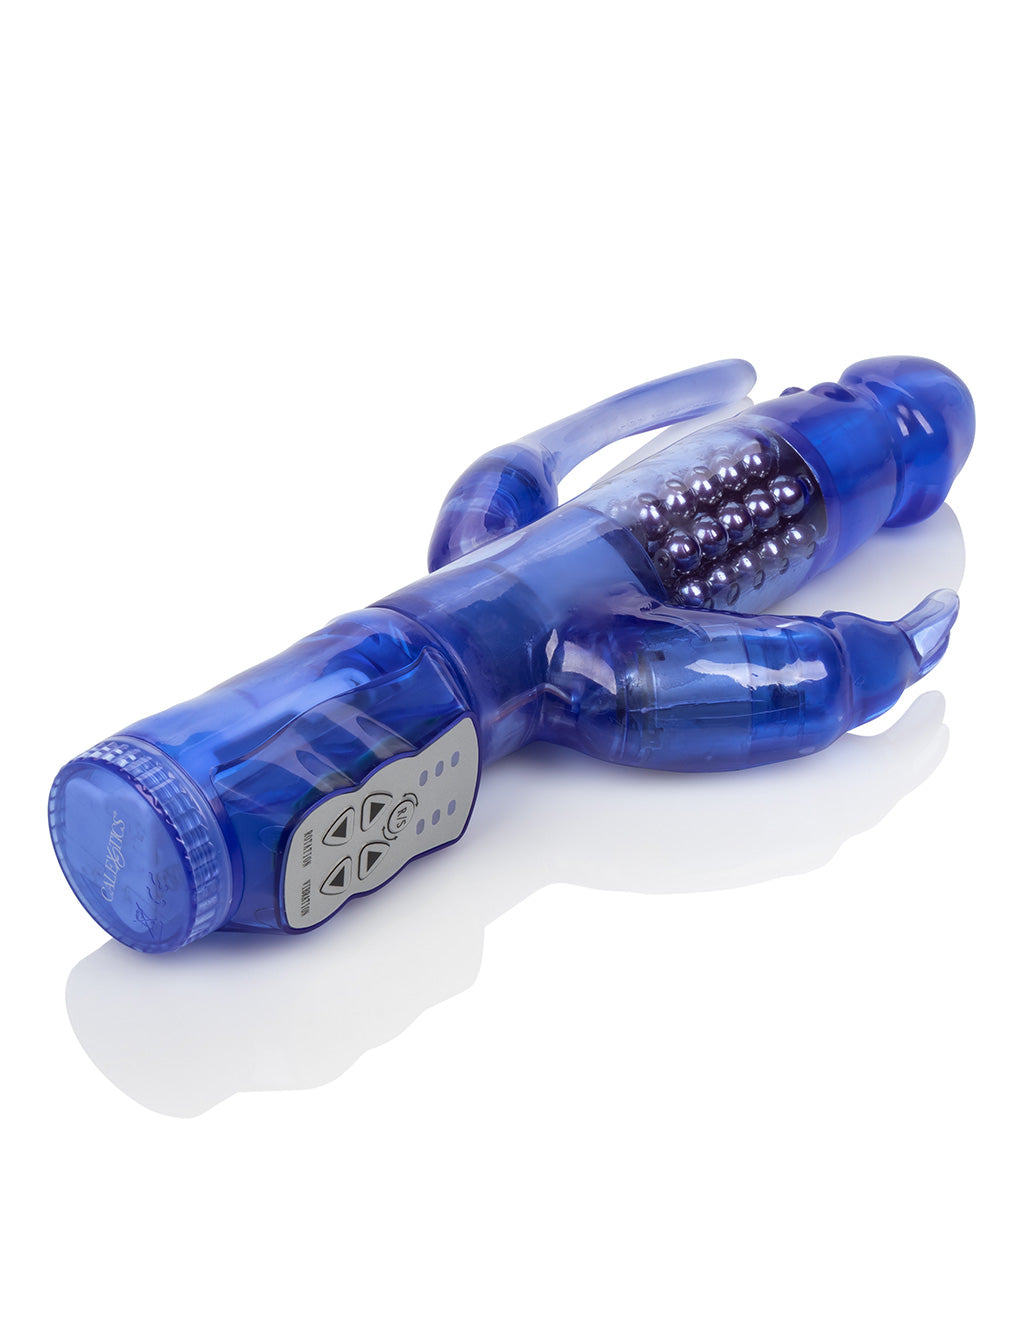 Cal Exotics Delight Triple Orgasm Toy Side Laying 